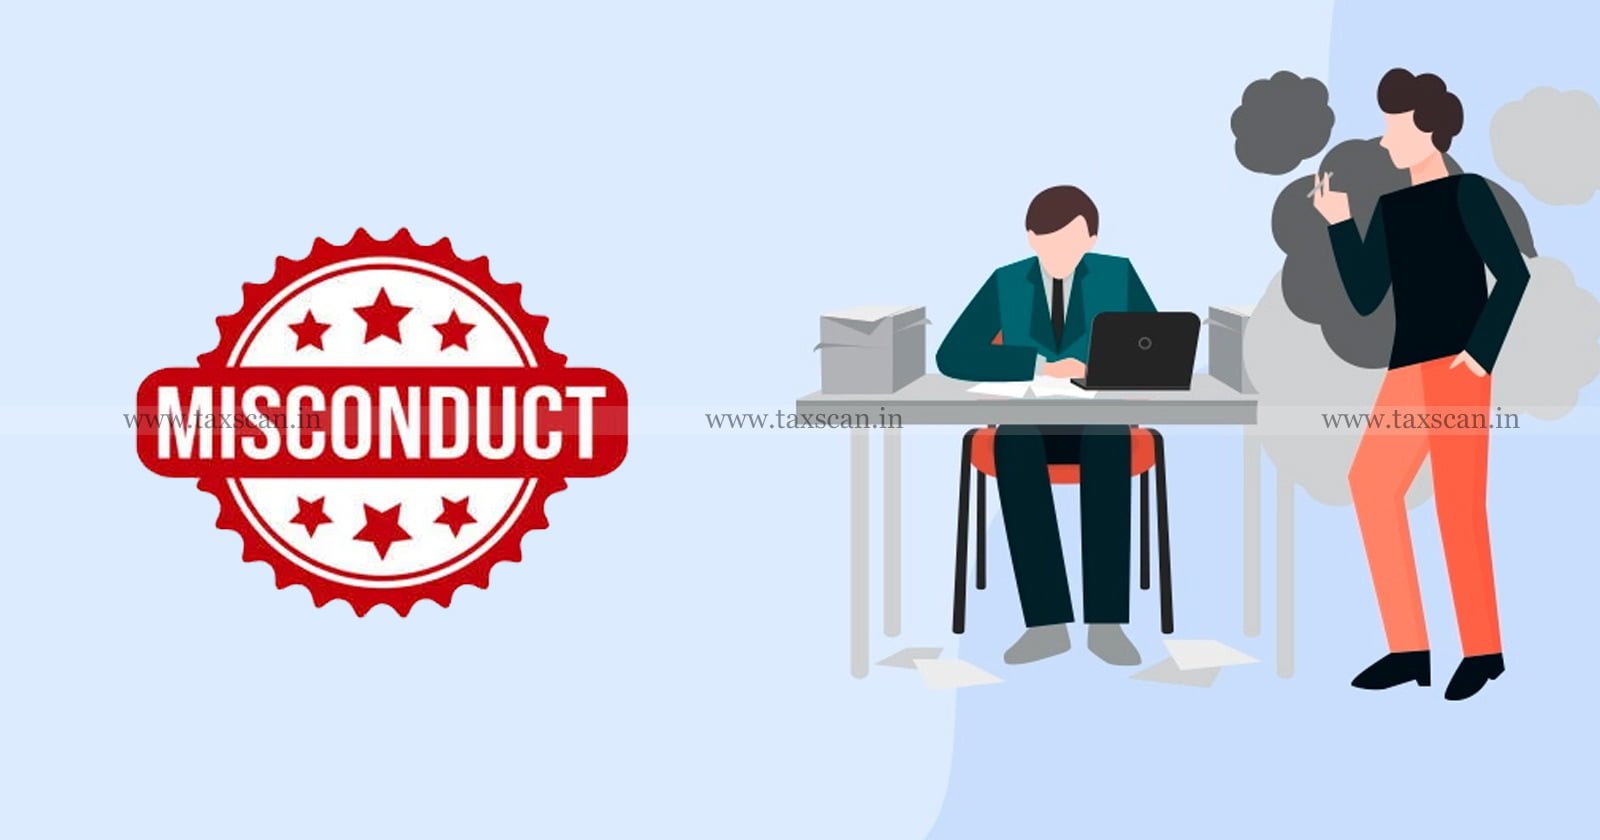 Professional Misconduct - IBBI - IP - IBBI warns IP - Bribe Demand - Bribe Demand and Non-Cooperation - Non-Cooperation with Inspecting Authority - taxscan